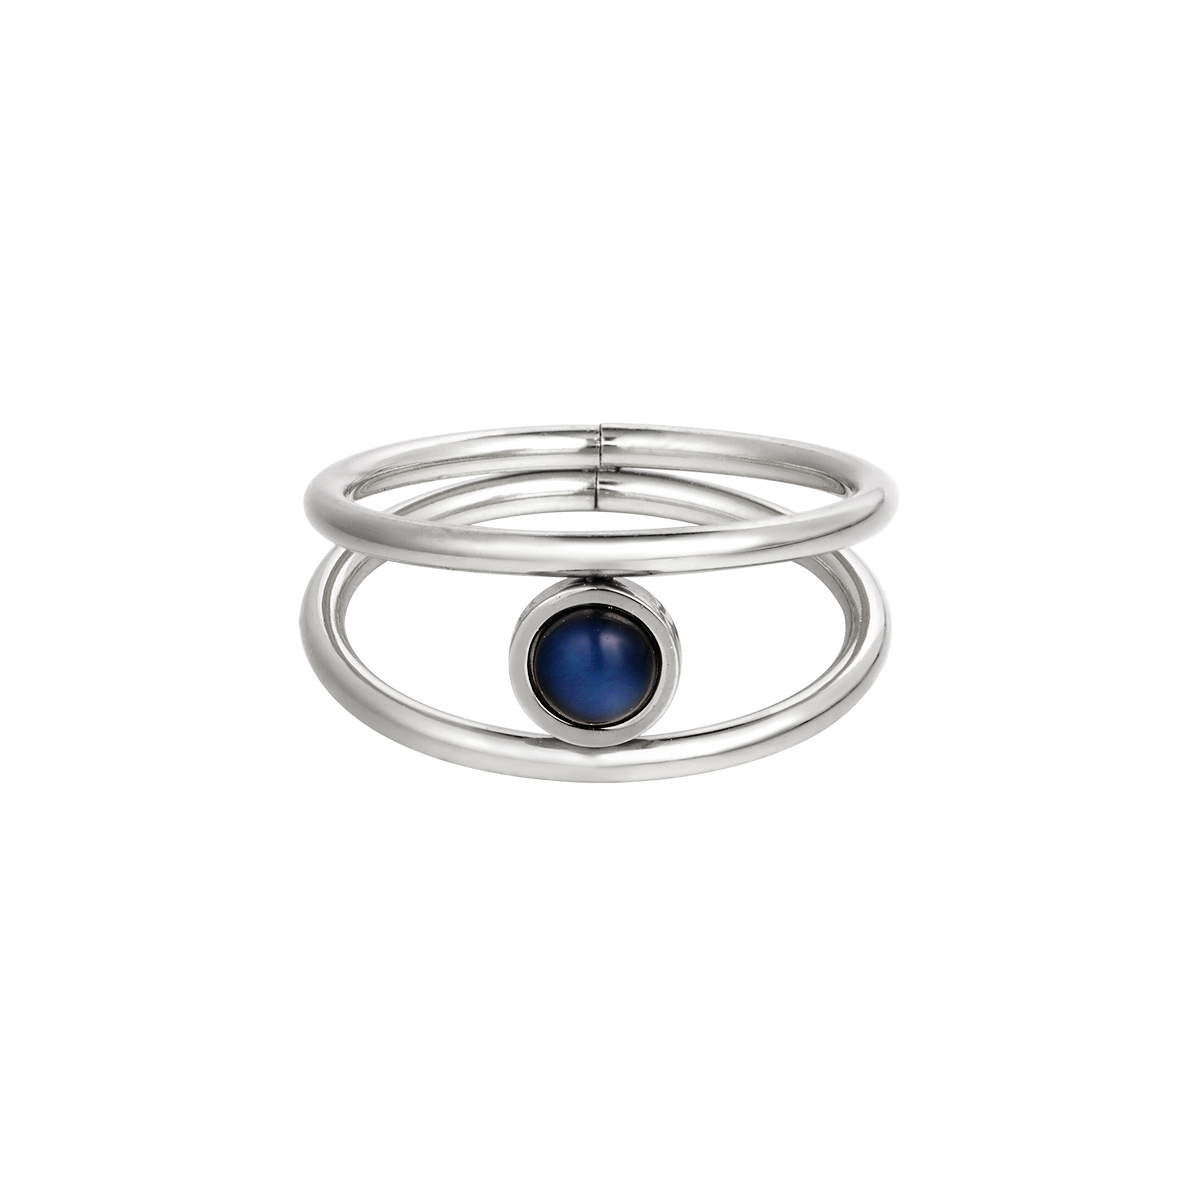 Stainless steel ring with enamel stone